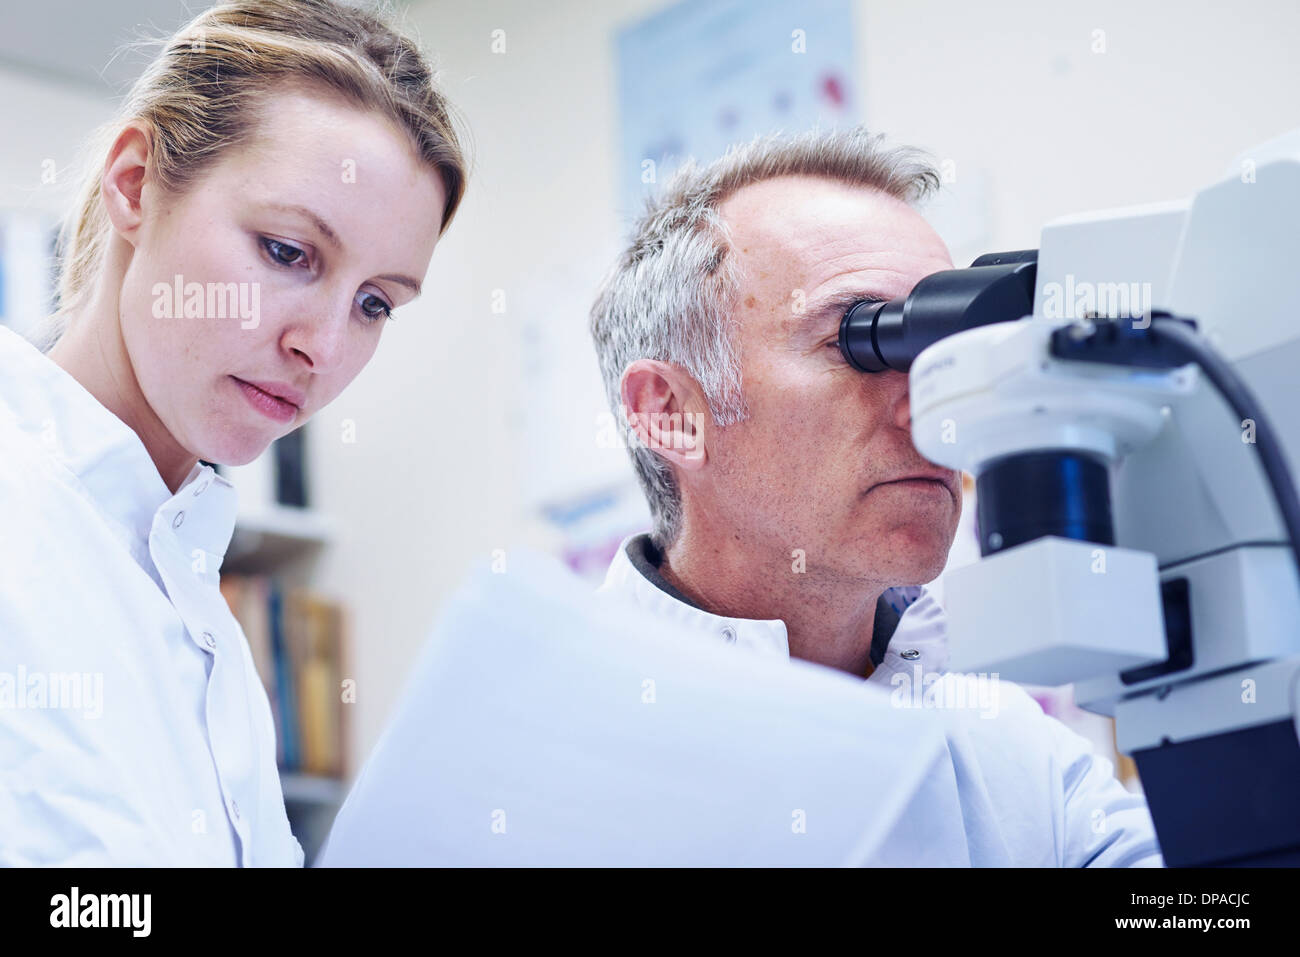 Man looking through microscope, woman looking at paperwork Banque D'Images